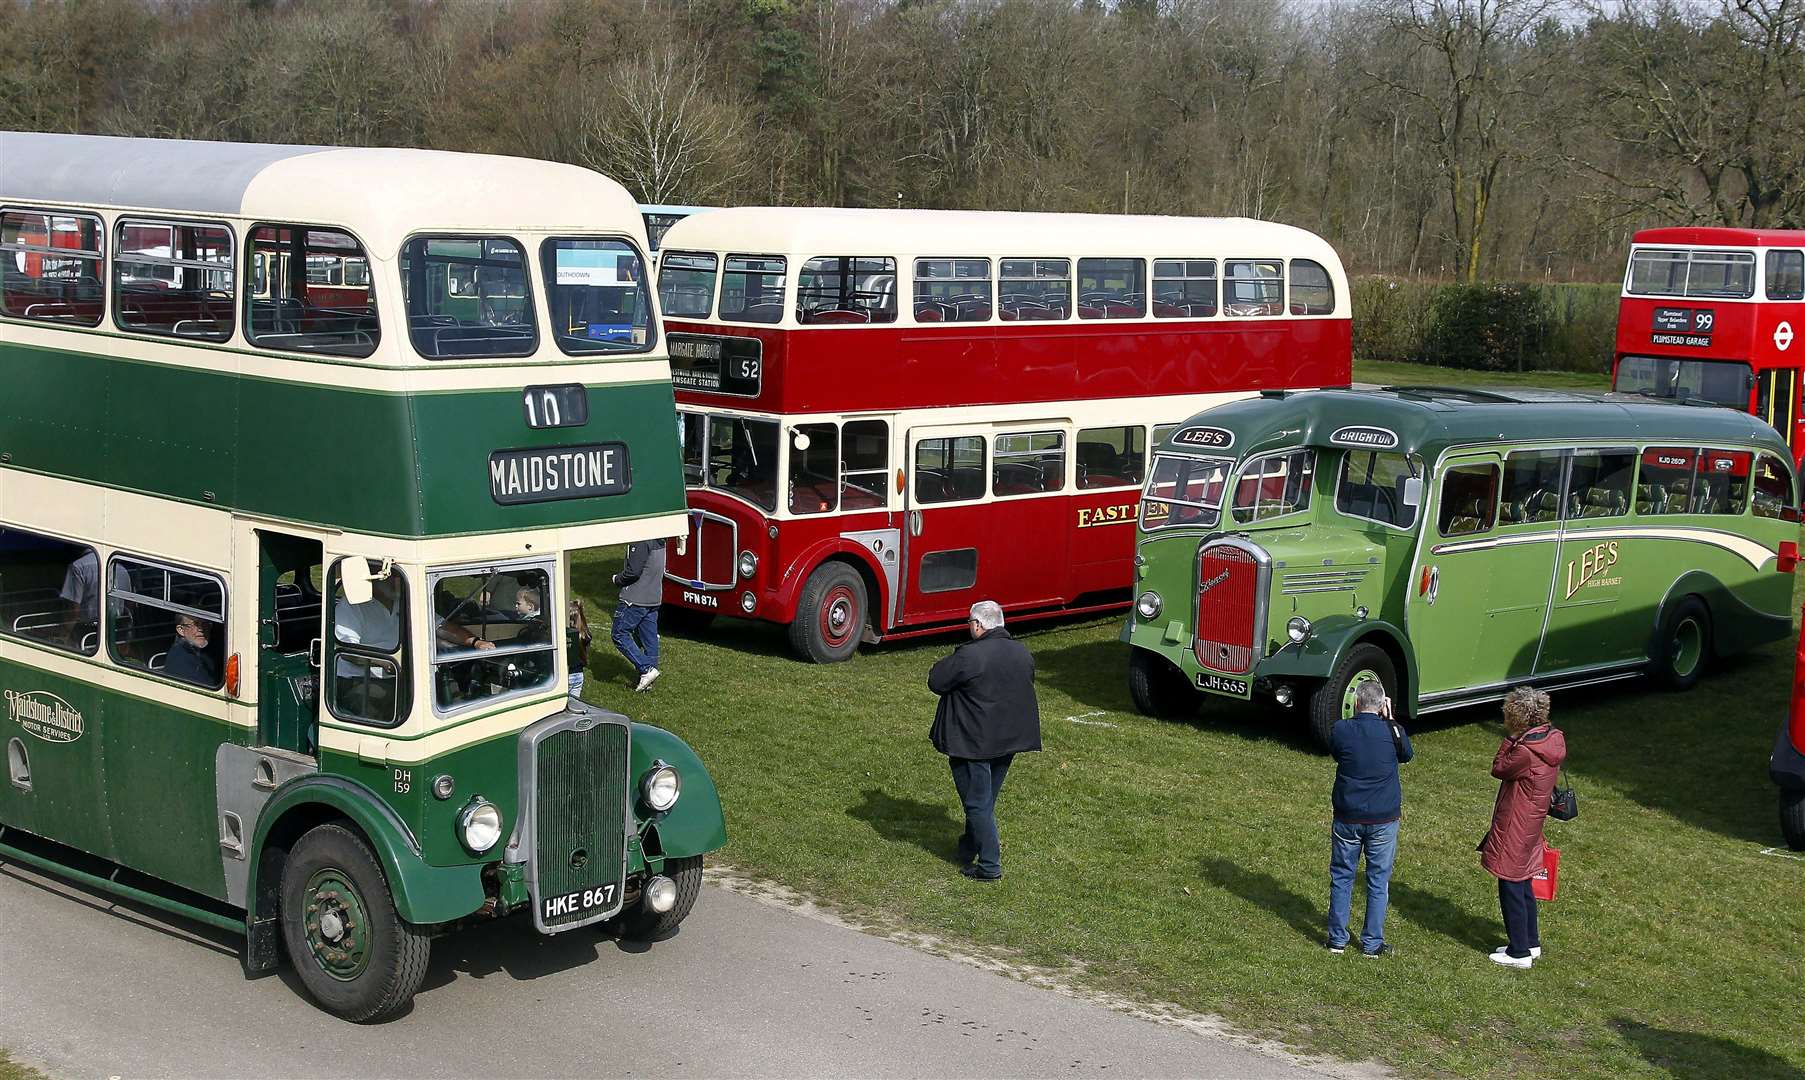 The South East Bus Festival also coincides with this year’s transport event. Picture: Sean Aidan.